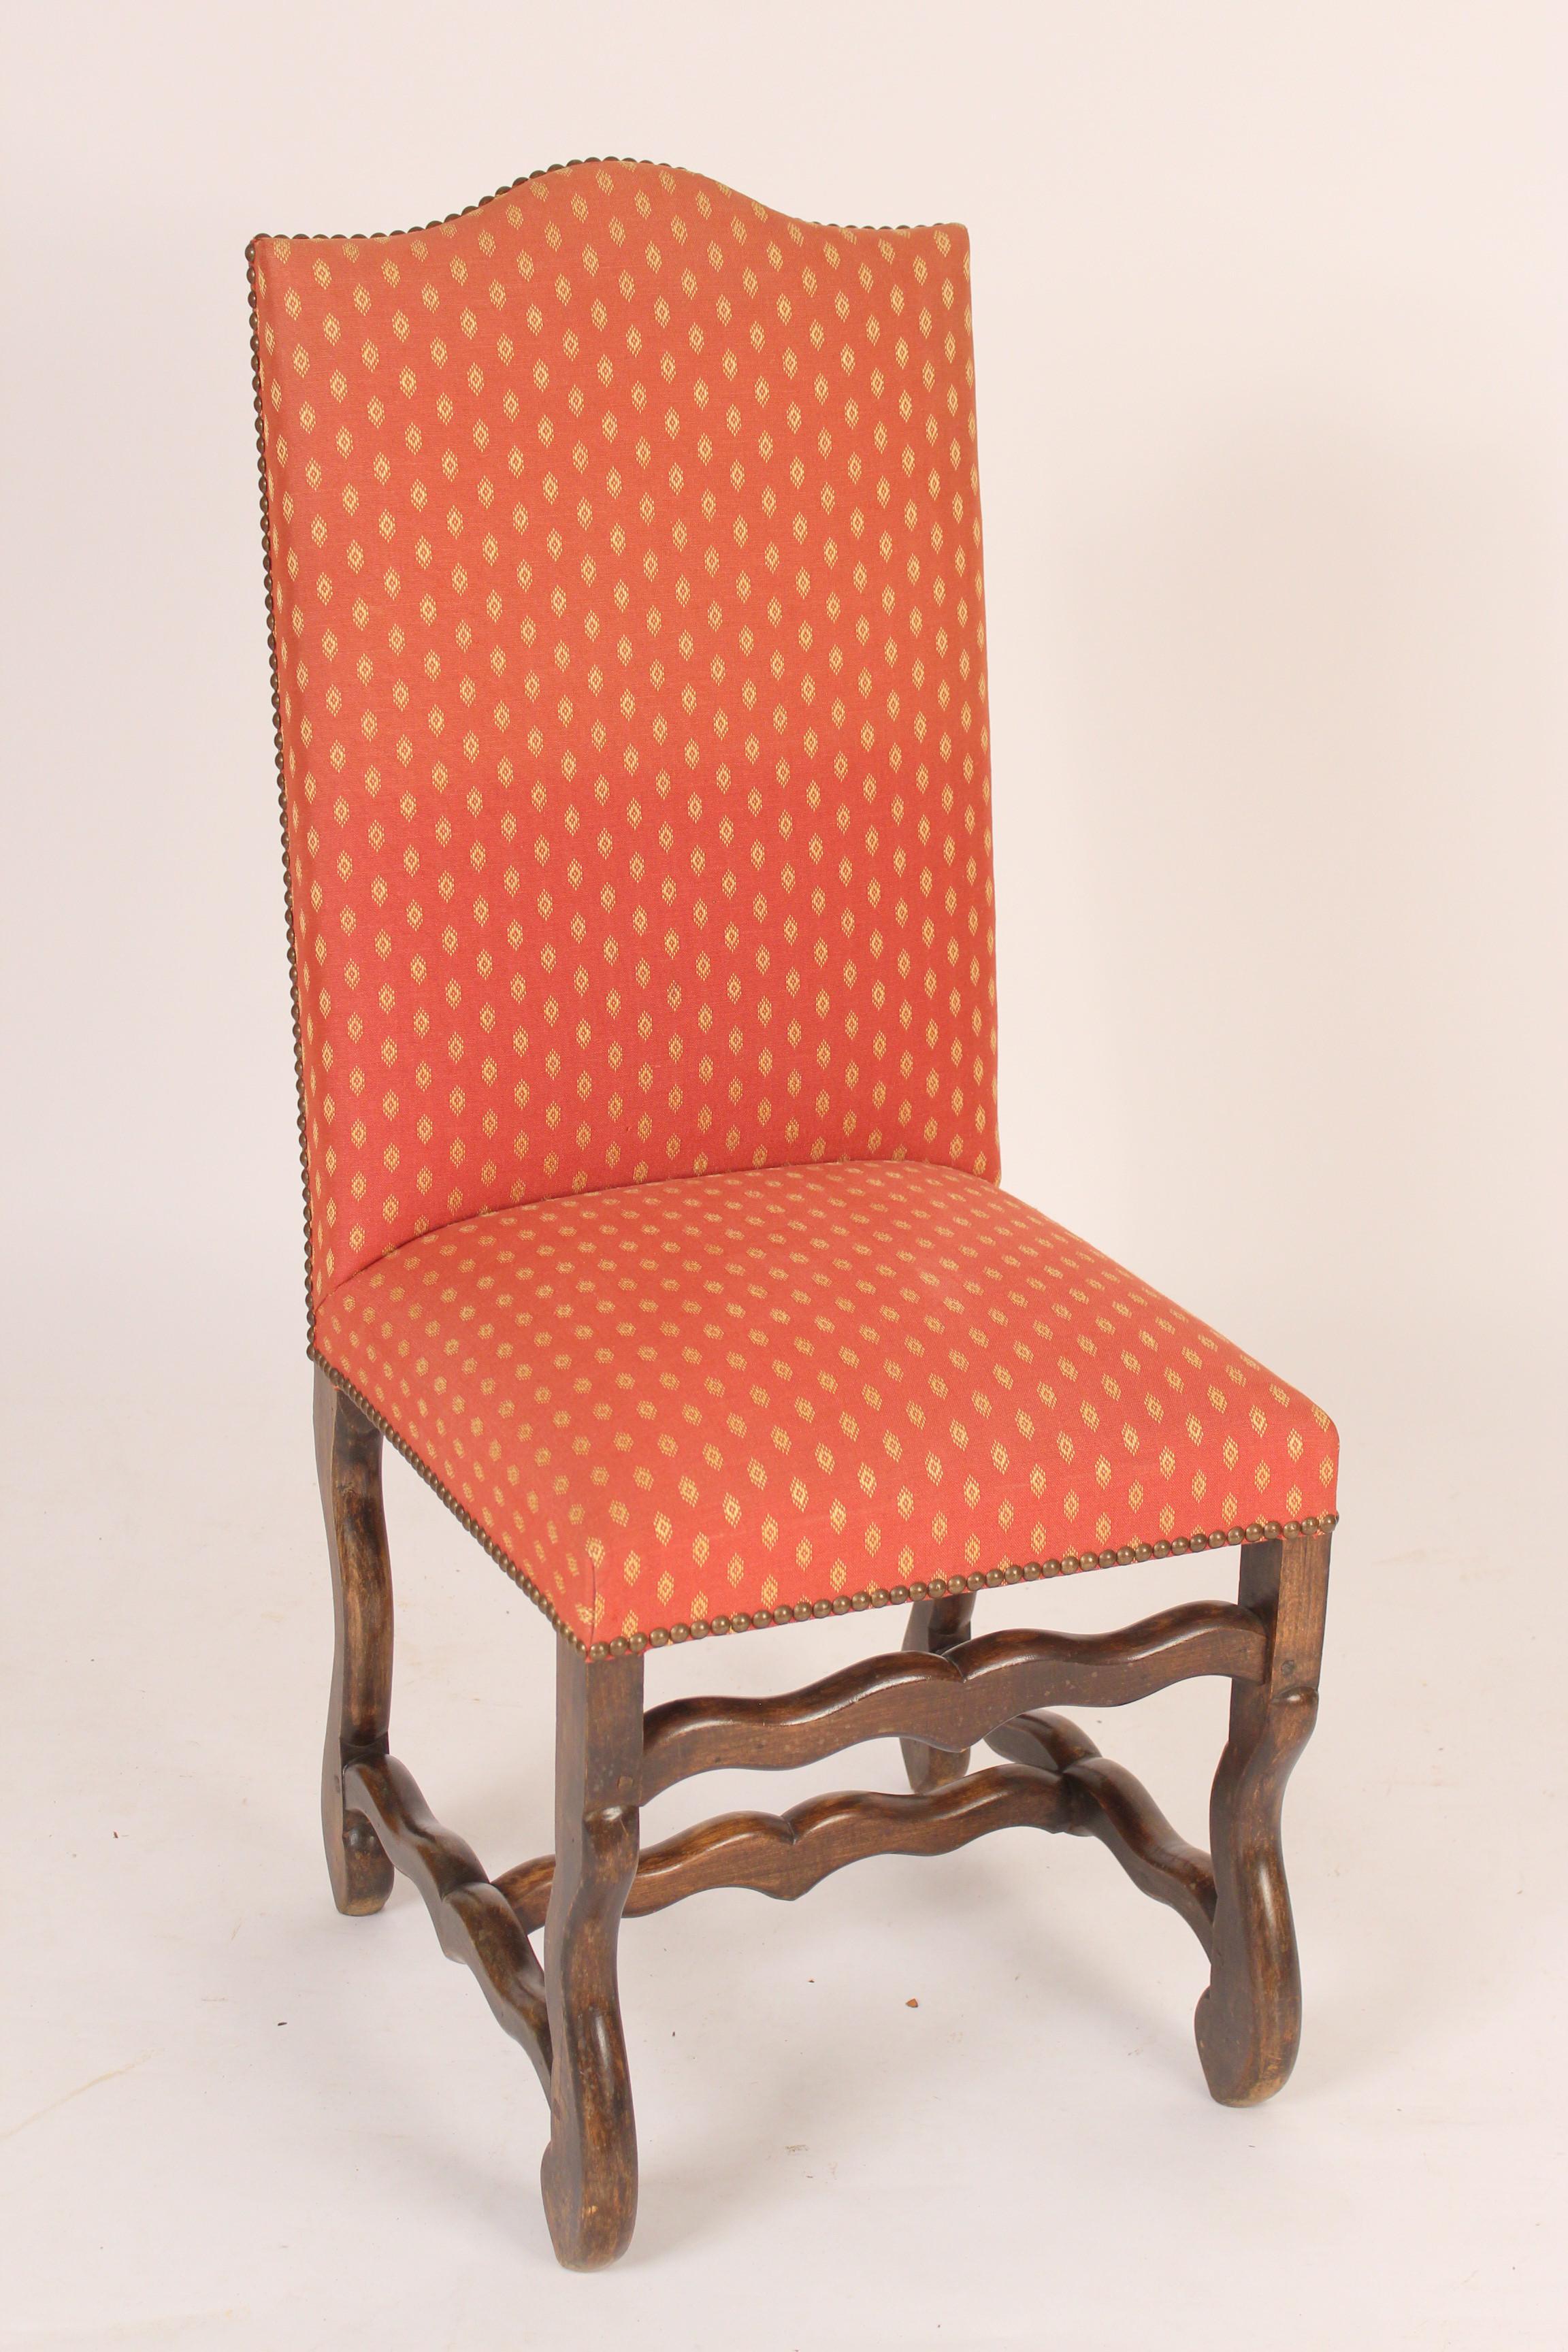 Set of 6 Louis XIV beech wood dining room chairs, mid-20th century. With mortise and tenon construction.